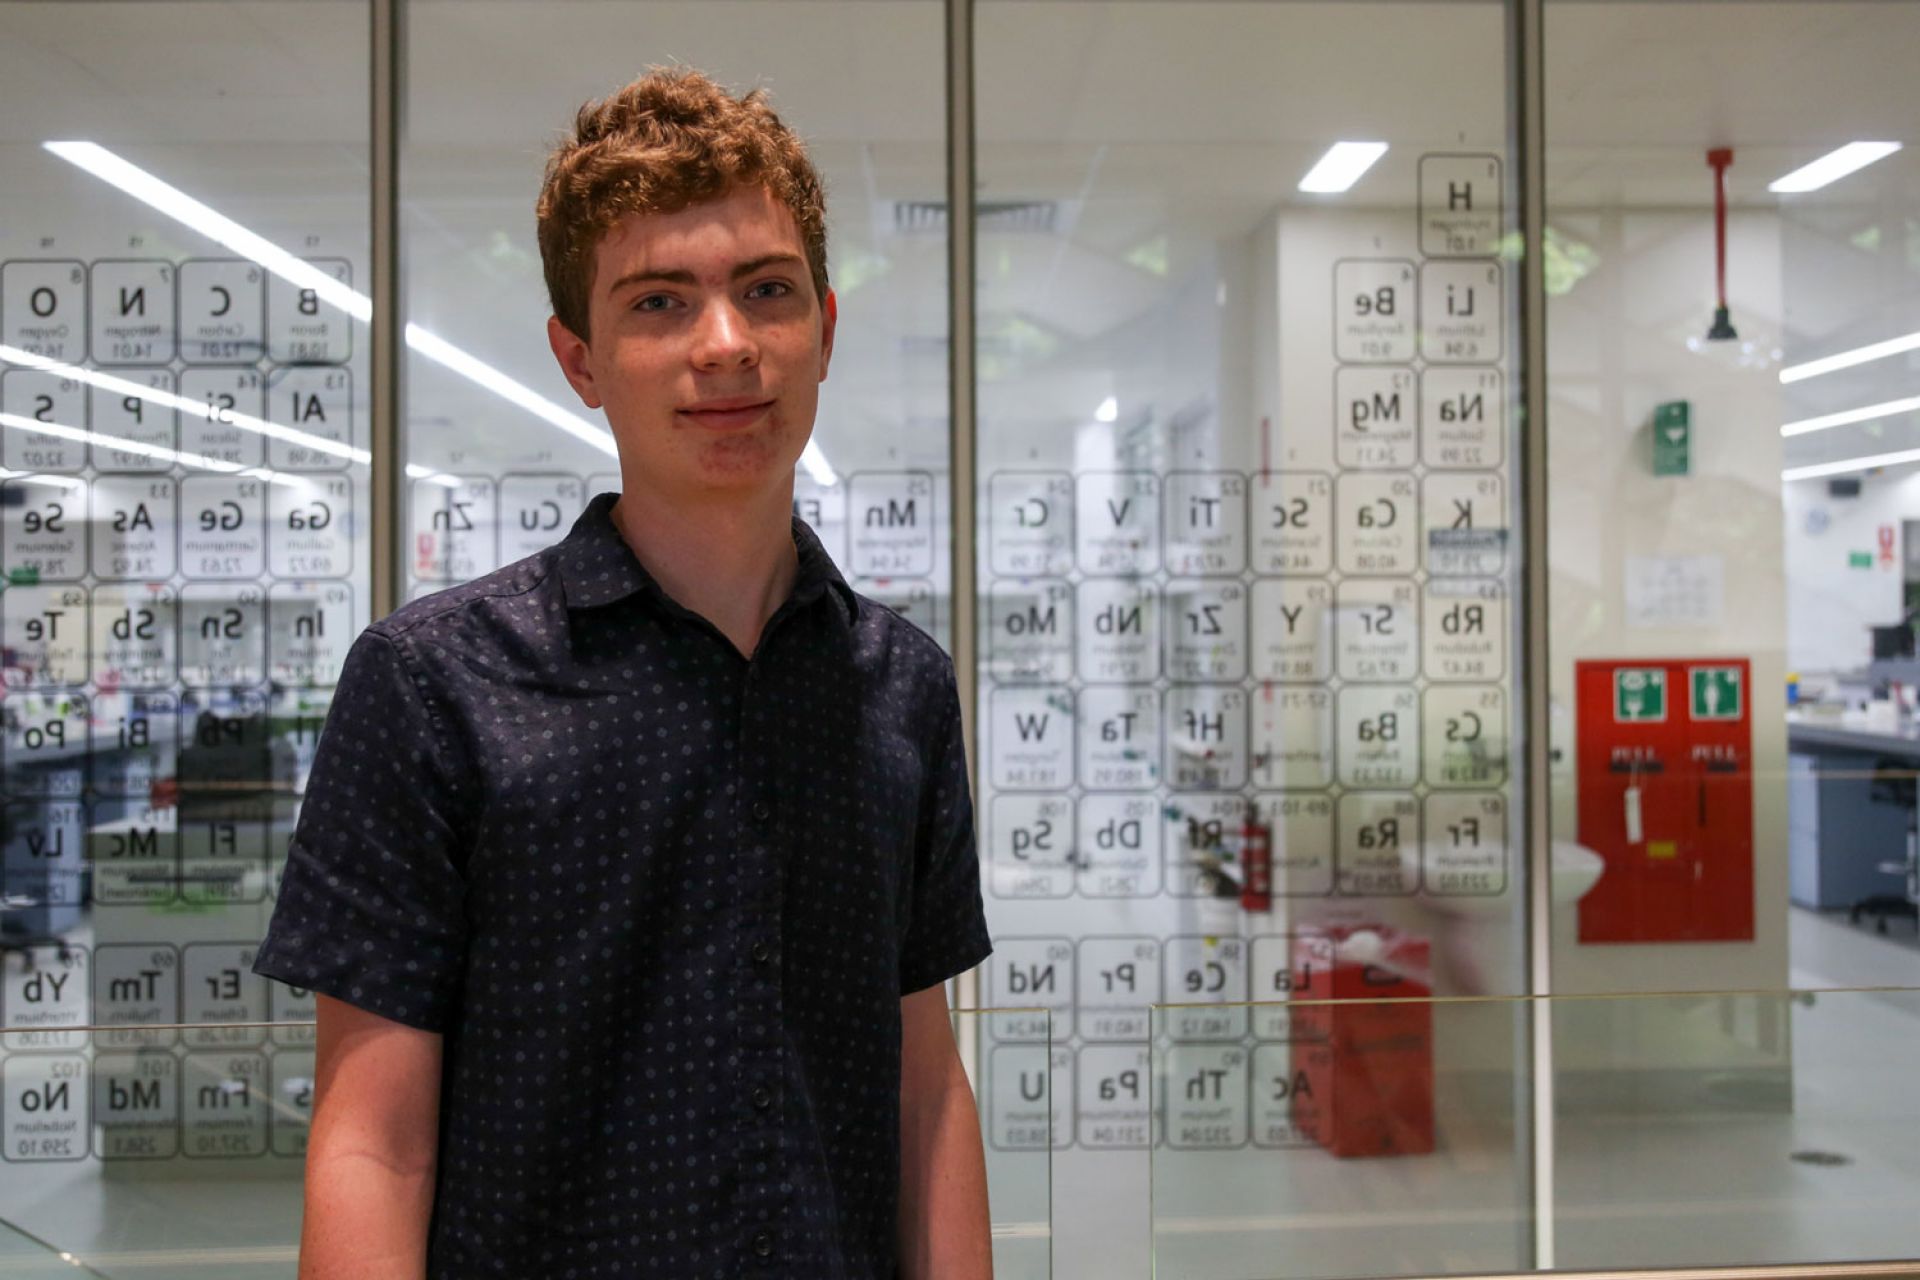 Portrait of Patrick, periodic table design on a window is behind him, the window leads to a lab